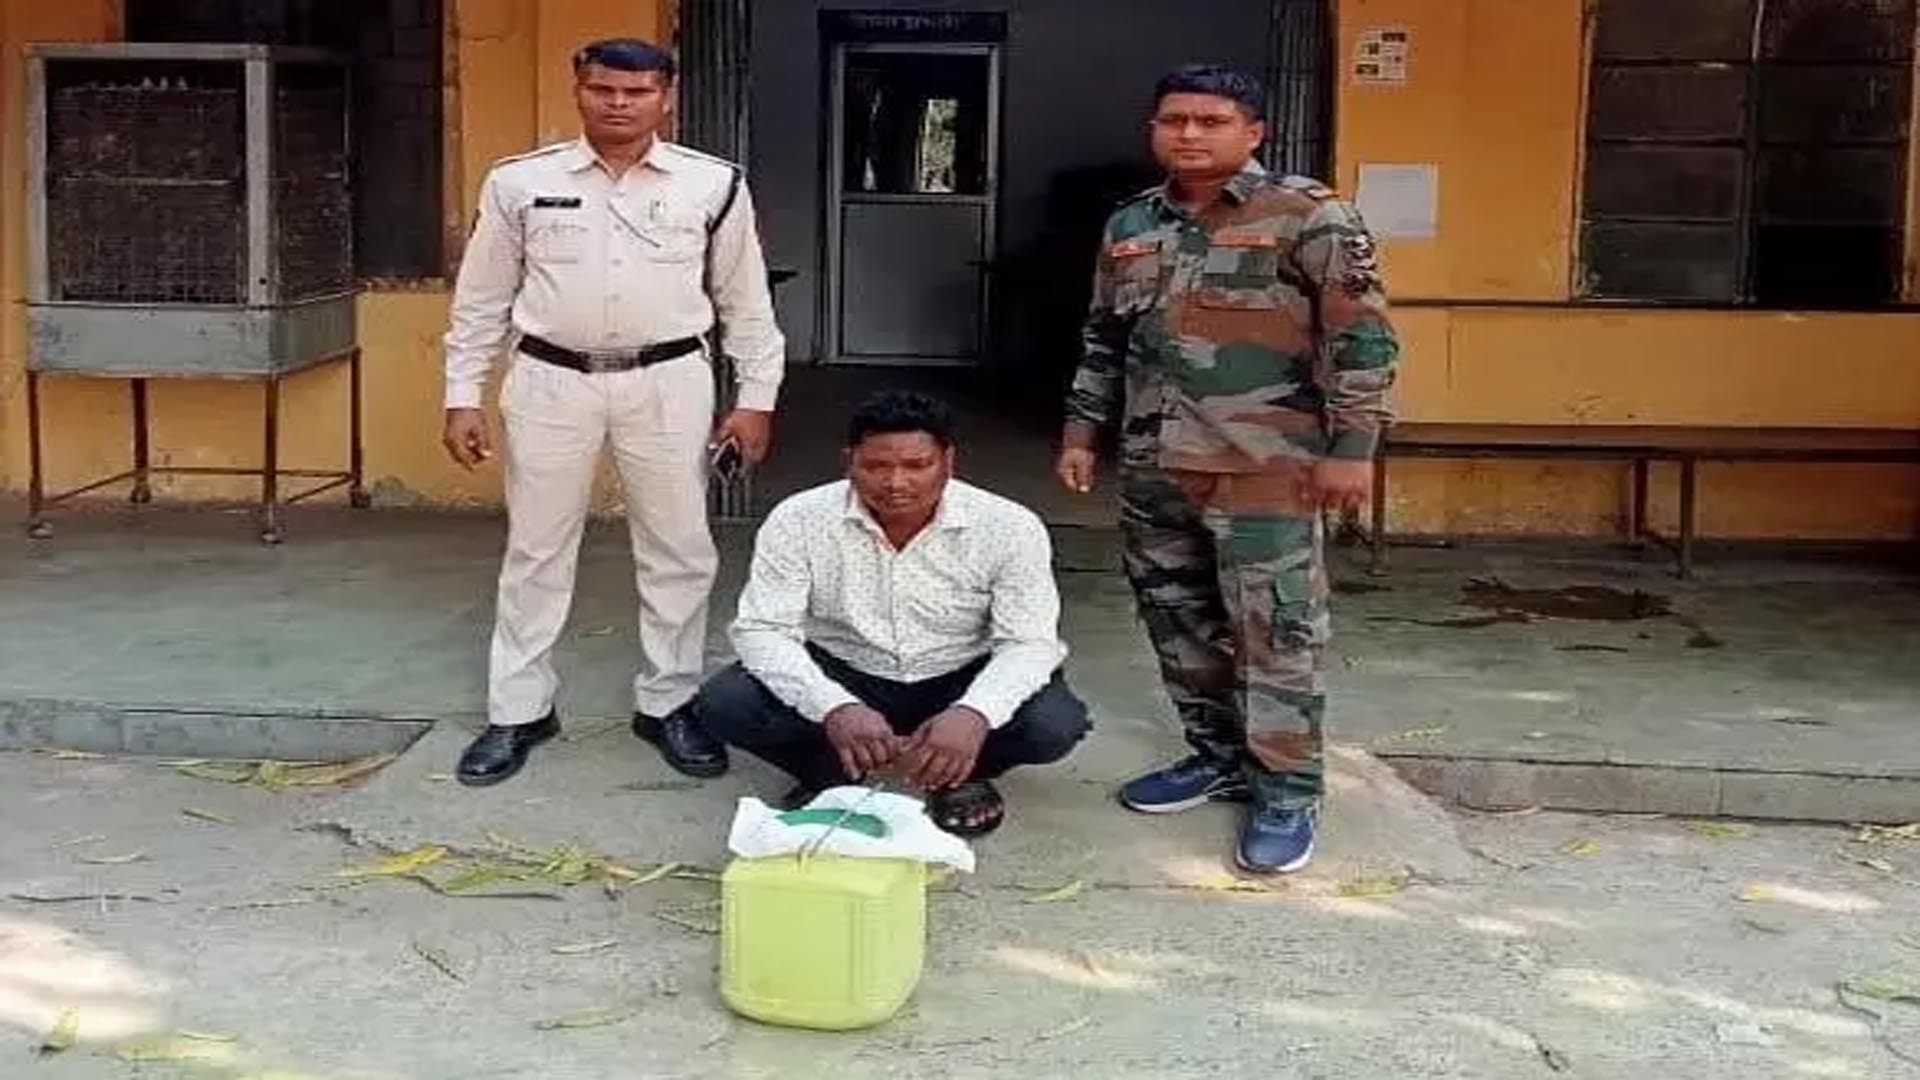 Police patrolling team raided, youth making liquor behind the house arrested